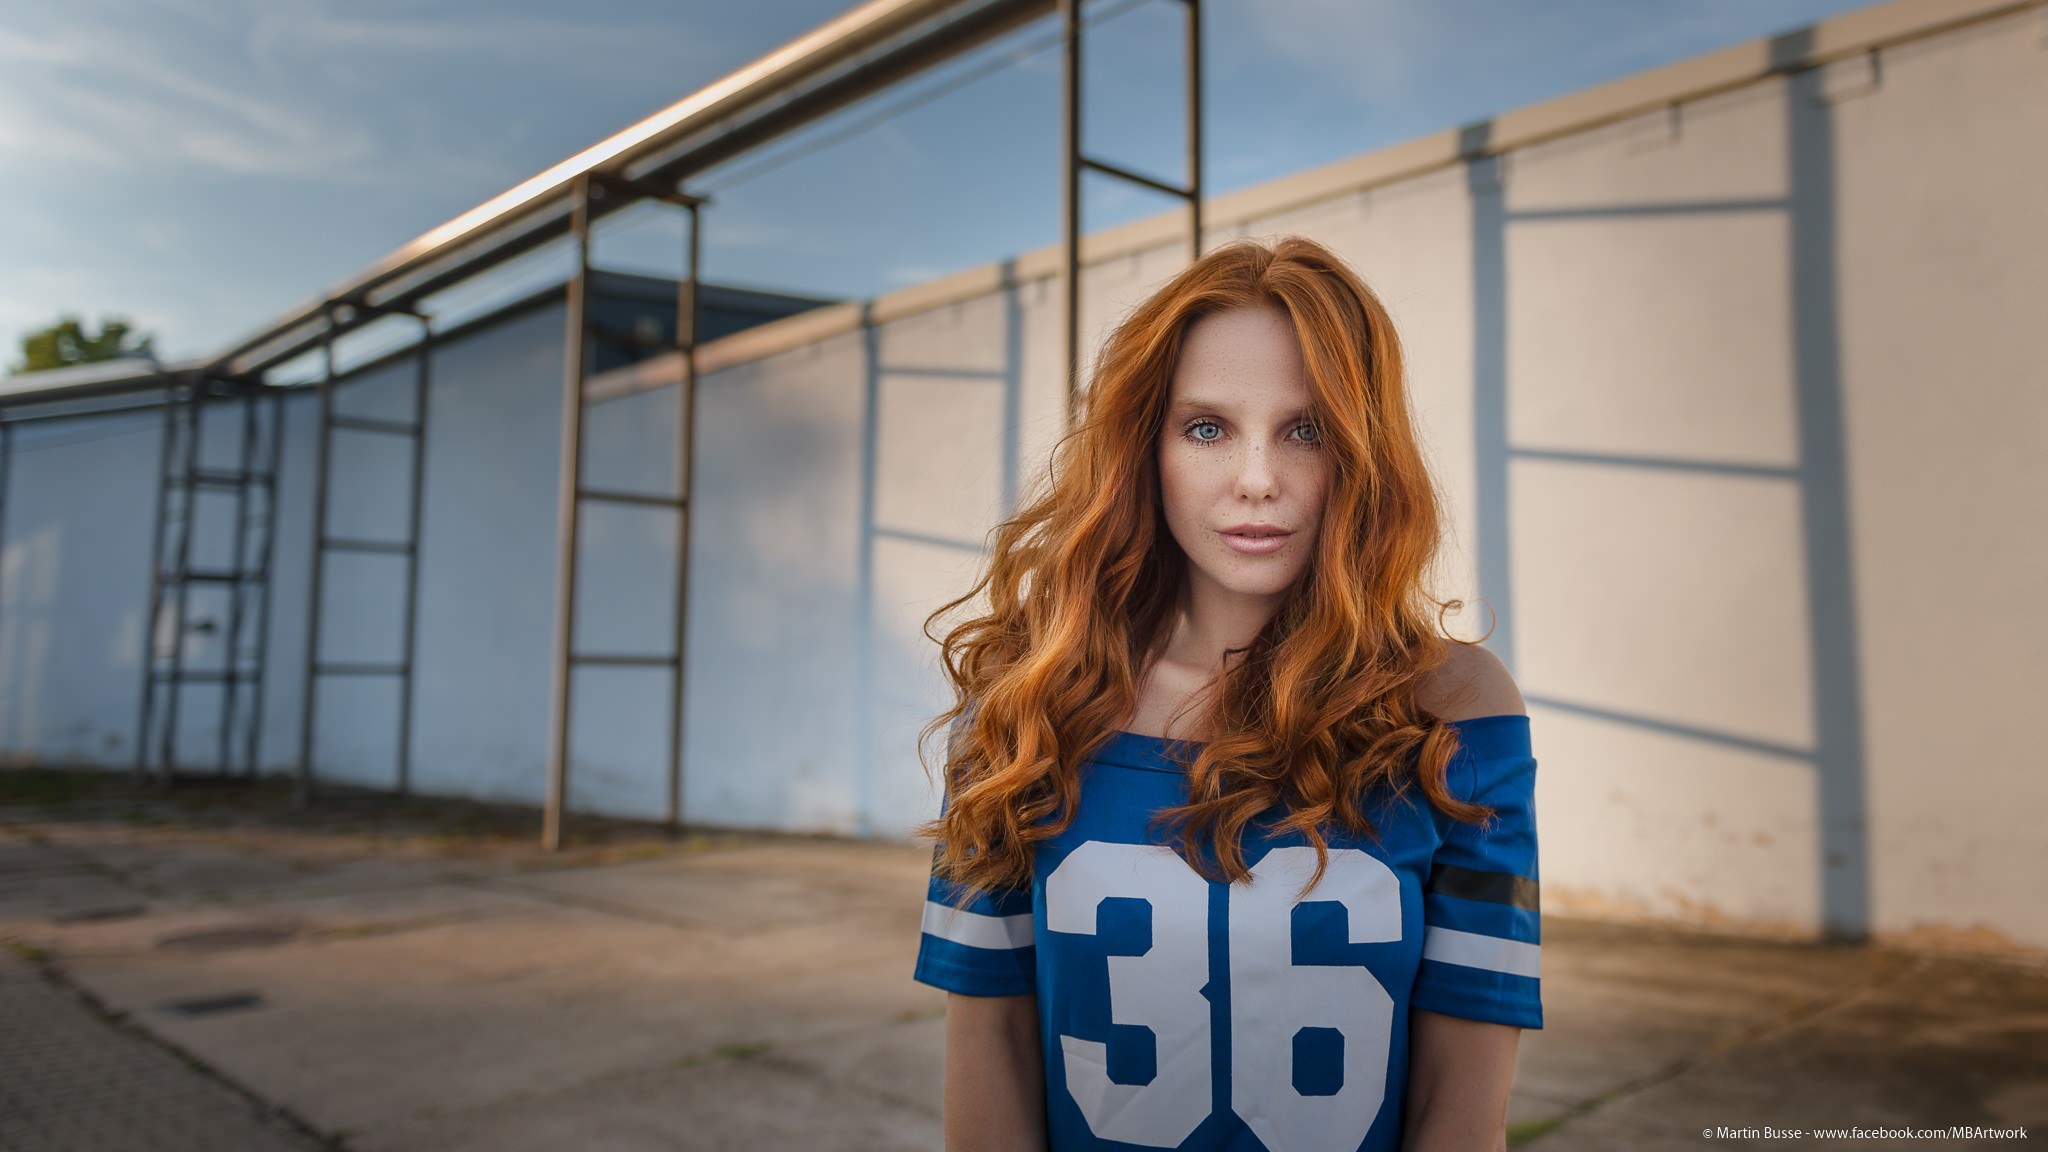 People 2048x1152 women face portrait redhead sports jerseys looking at viewer long hair numbers blue shirt blue clothing women outdoors outdoors dyed hair urban Martin Busse pink lipstick freckles